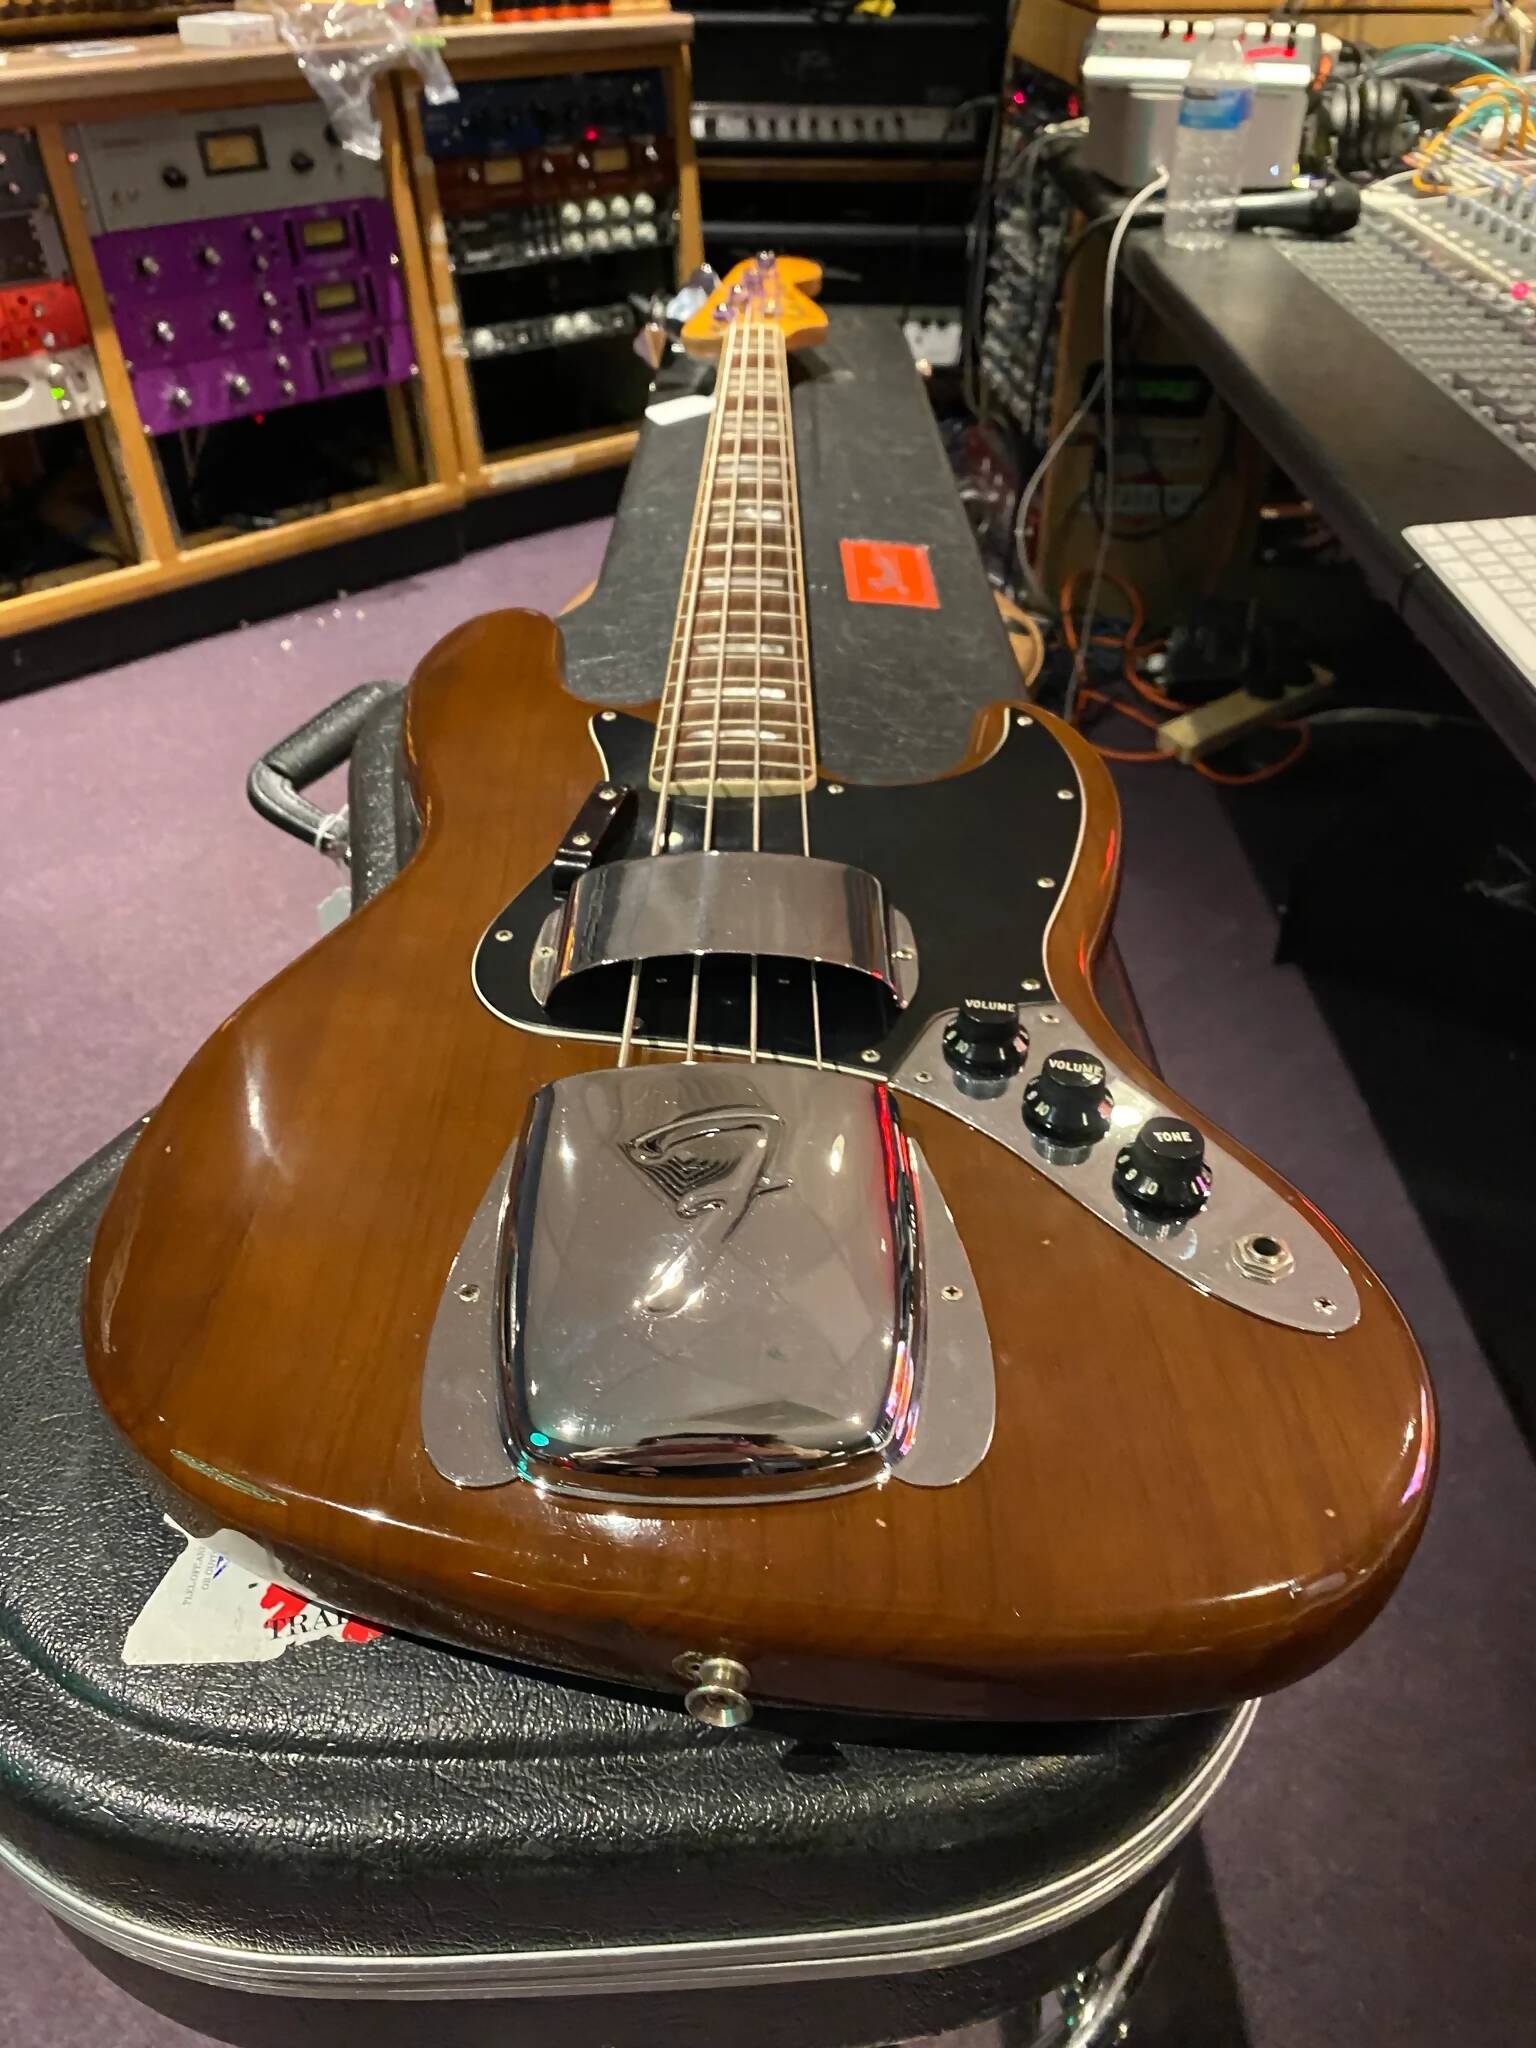 1978 Fender Jazz Bass Mocha Brown ONE OWNER Vintage 70s American Block Inlay USA 4 Four String Bass Guitar